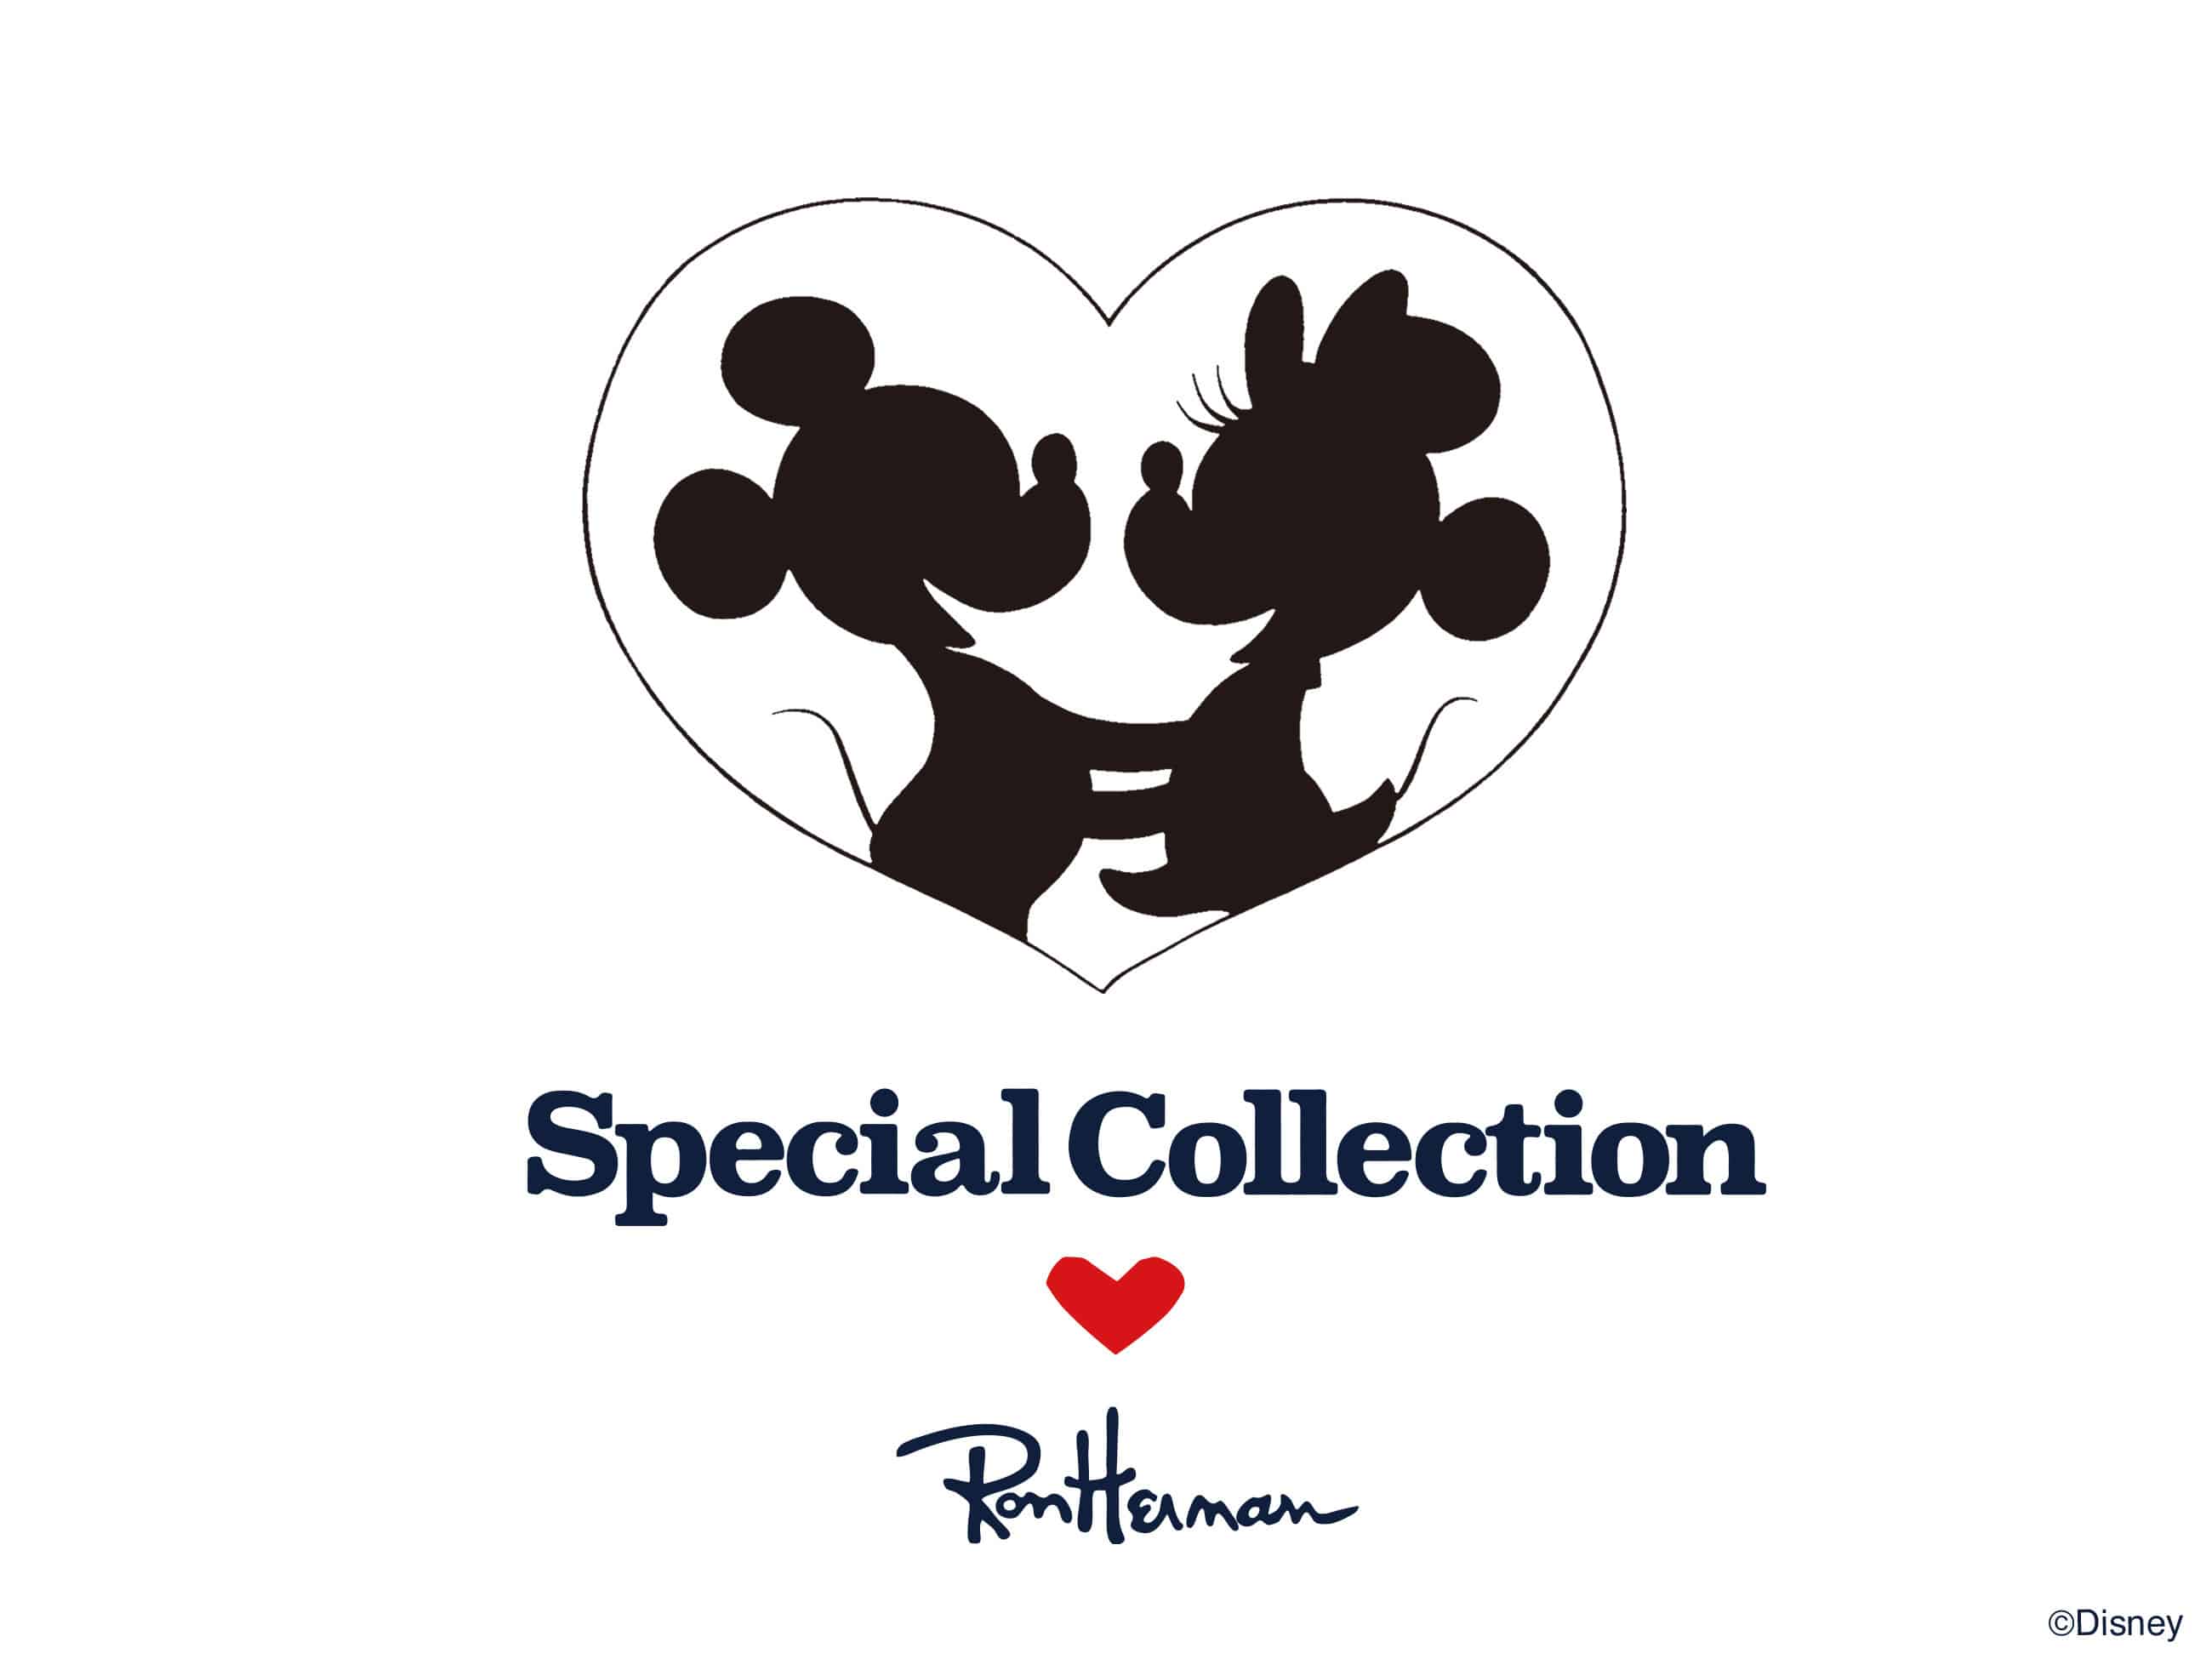 Disney Special Collection 11.18(Sat) Coming Soon!